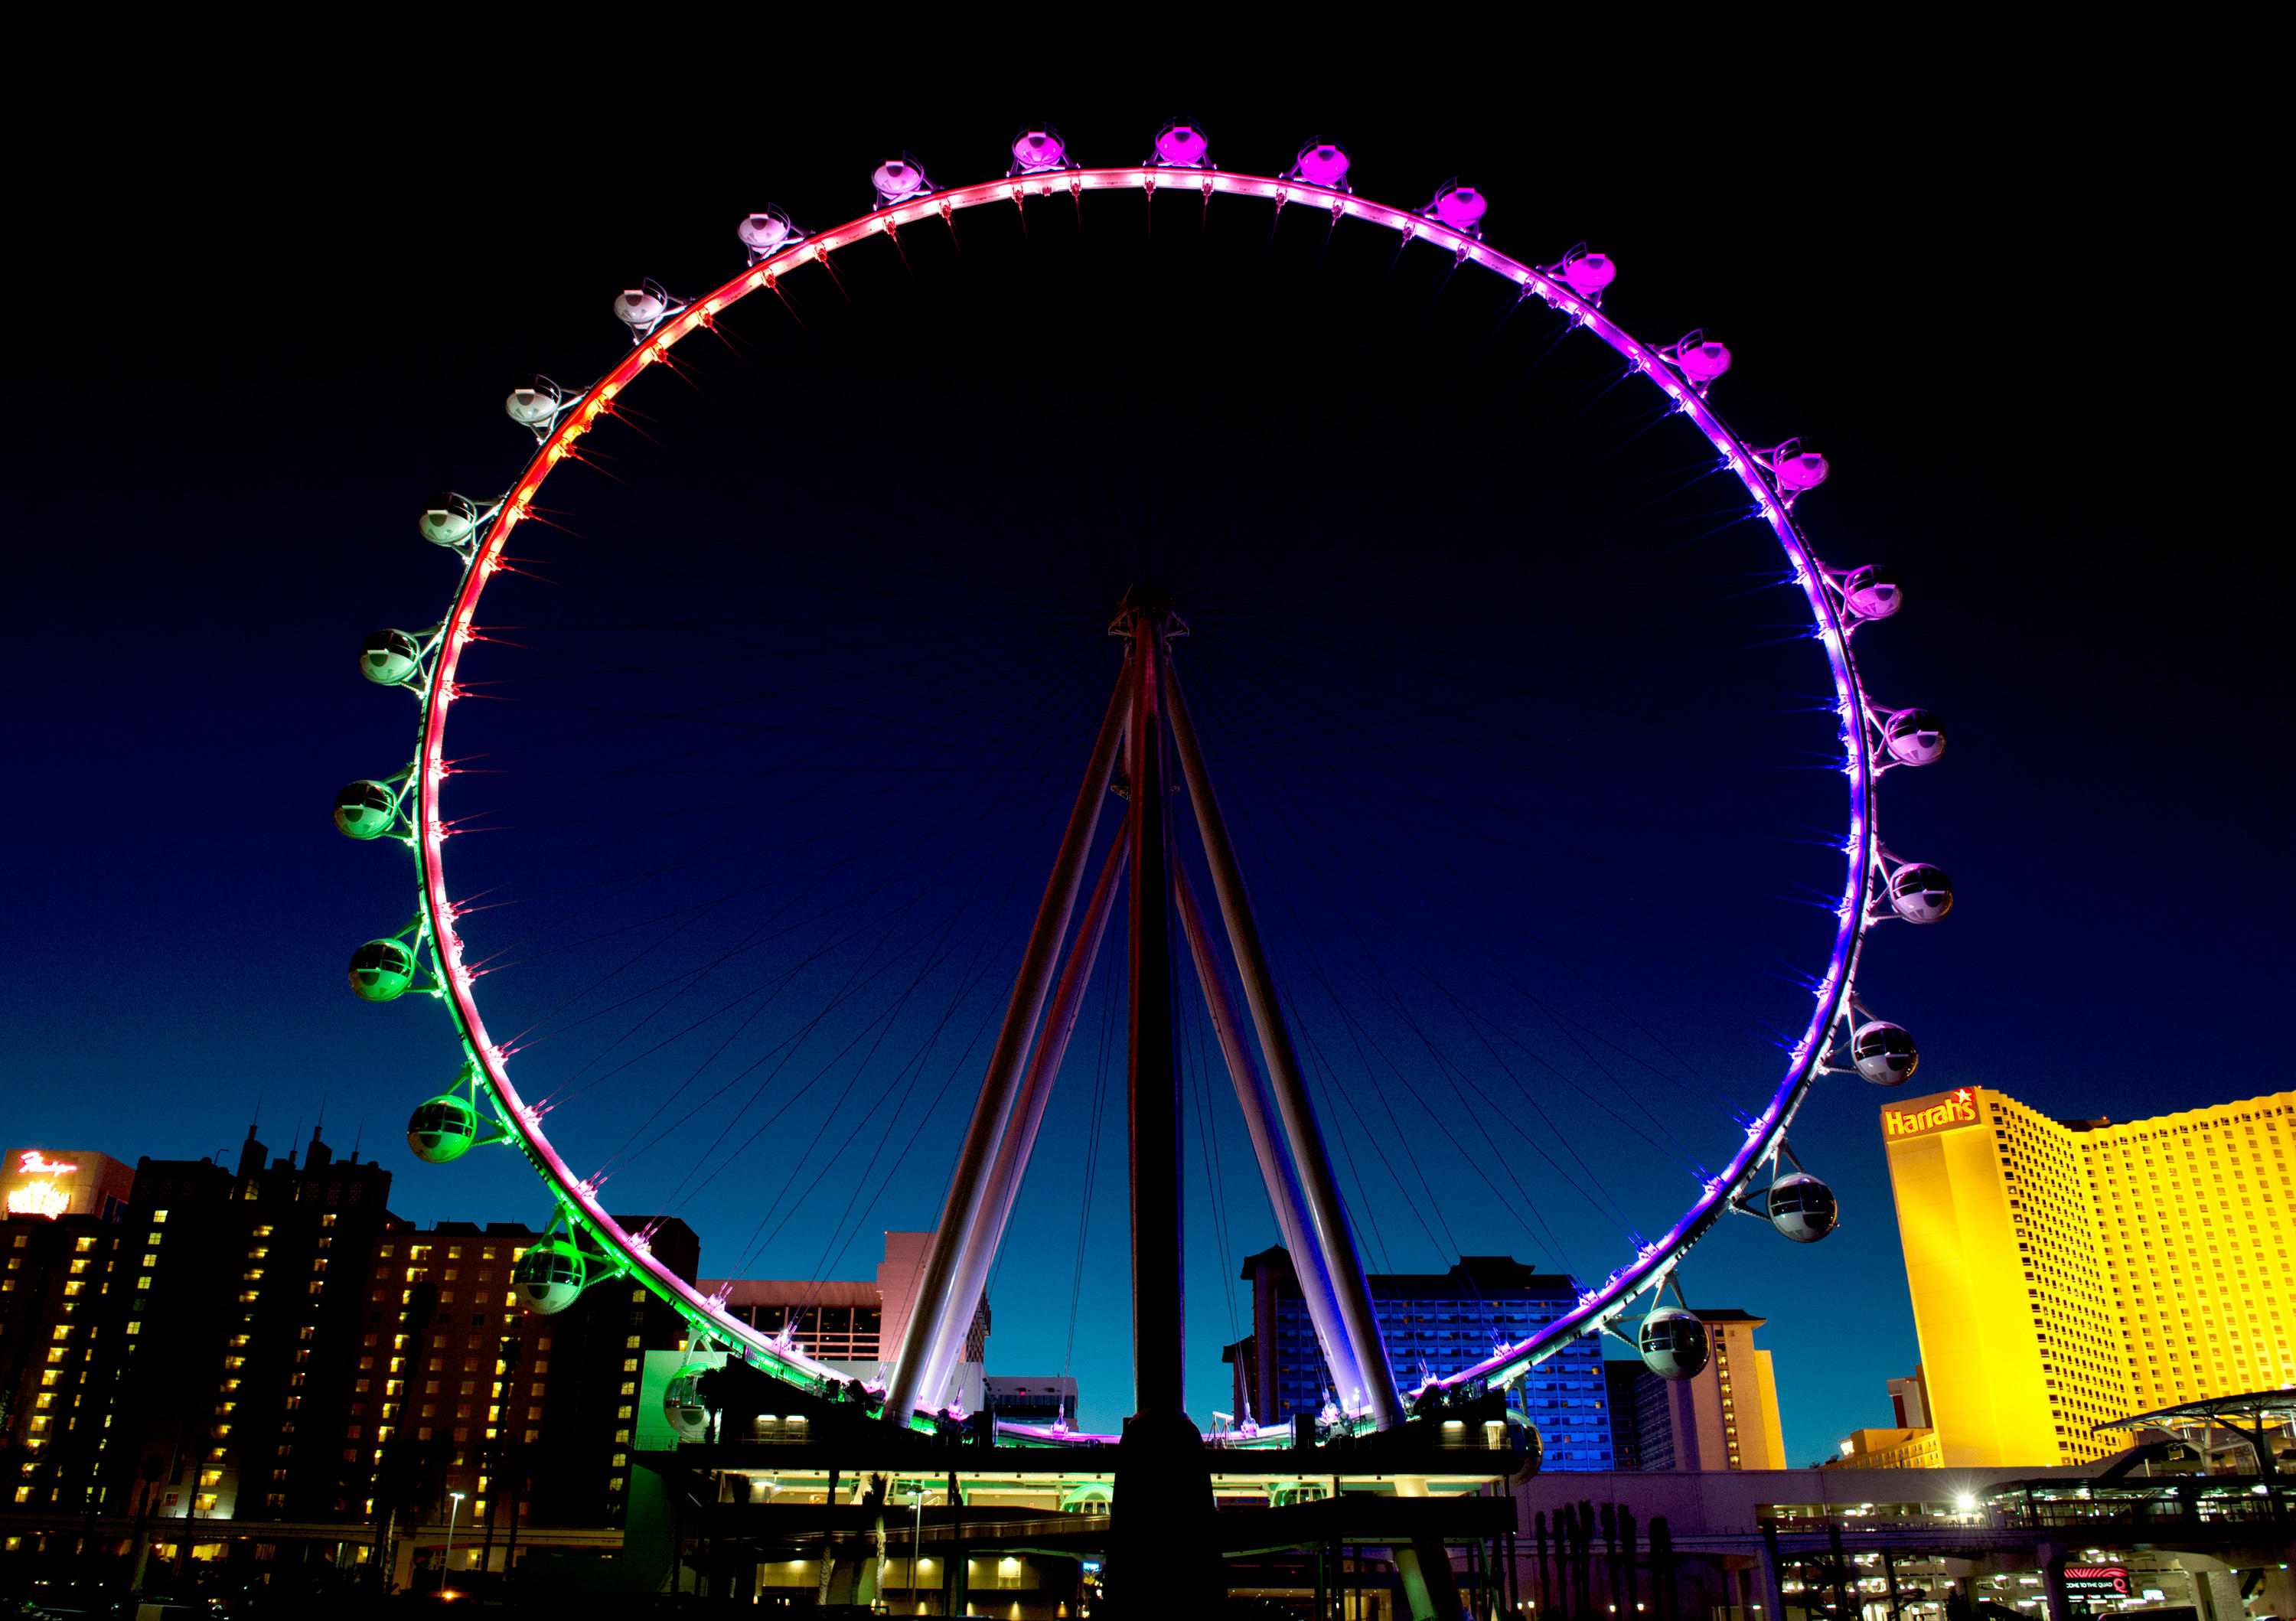 The High Roller at The Linq experience in the heart of the Las Vegas strip.